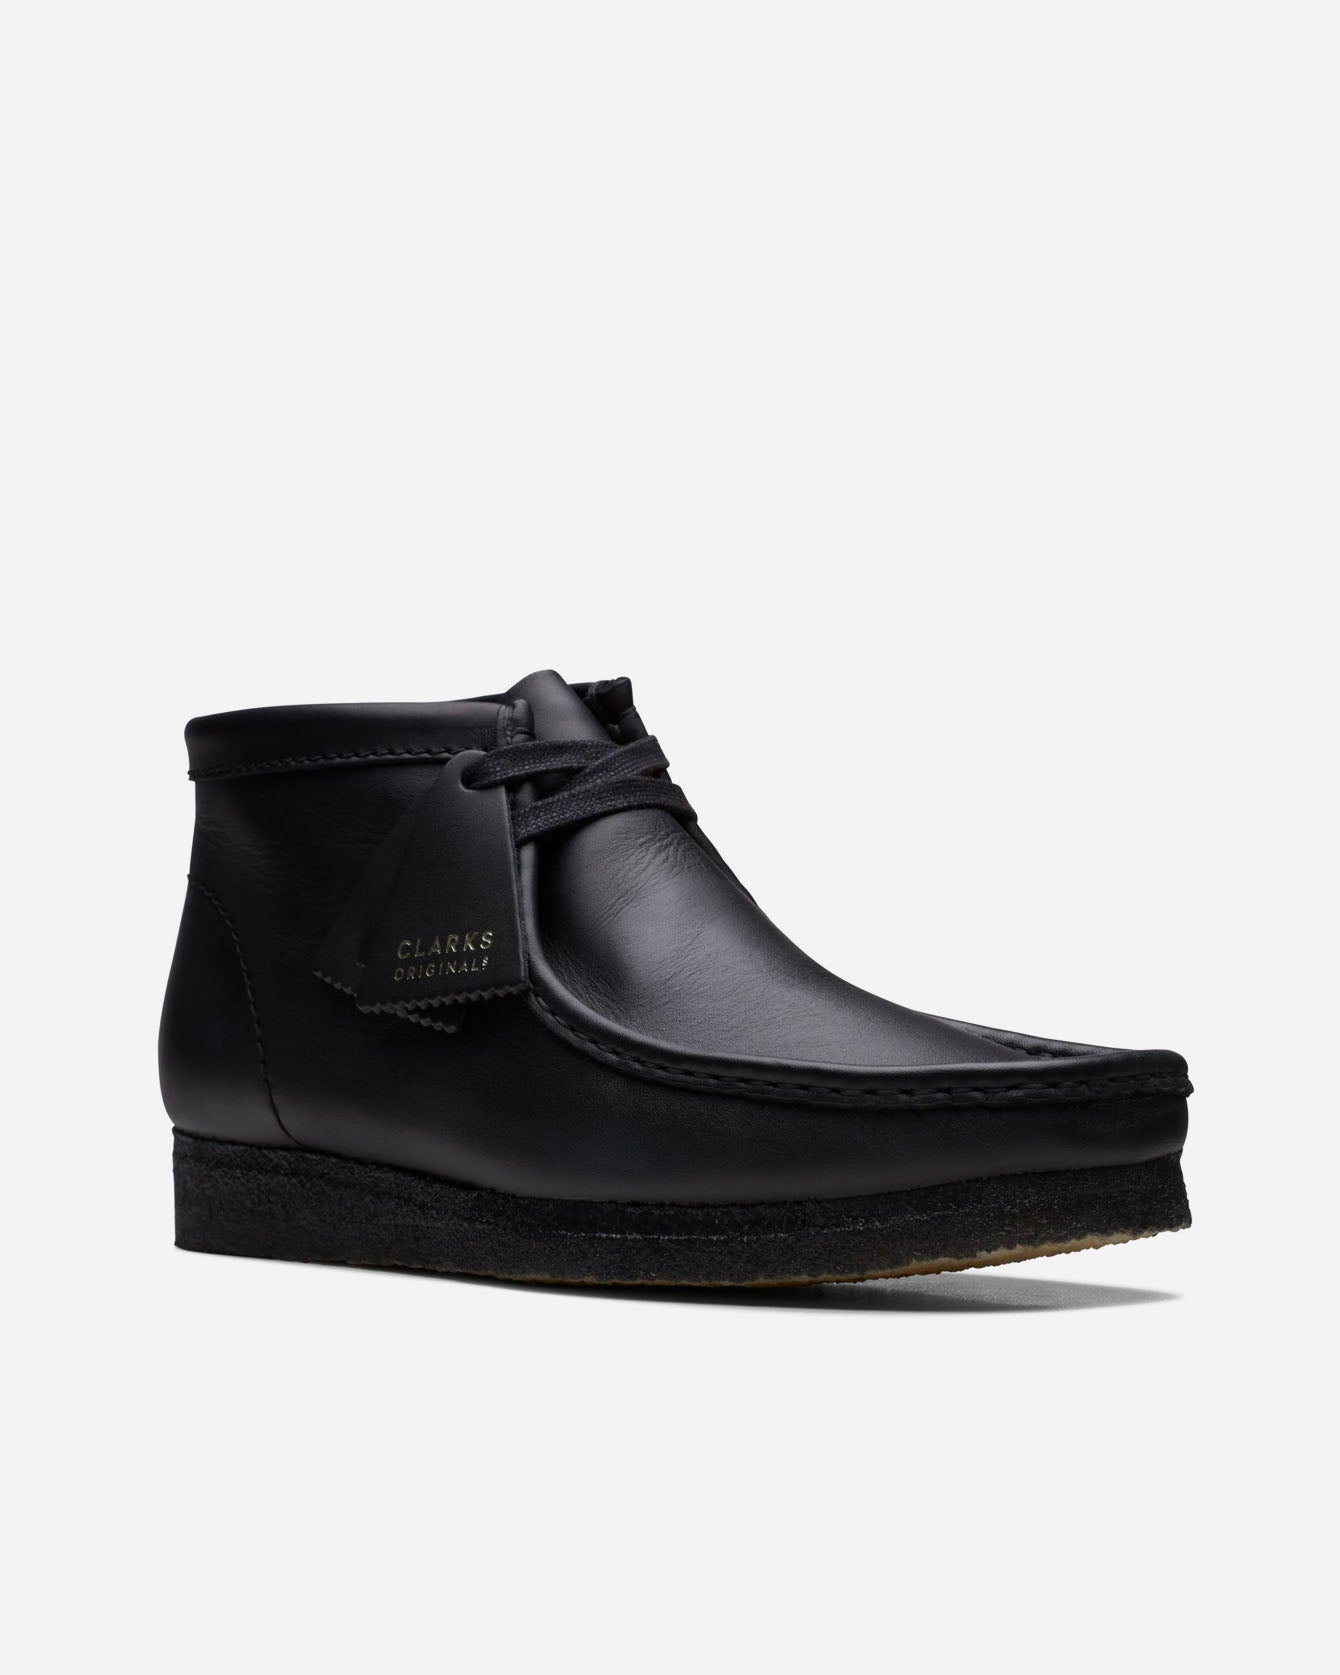 Wallabee Boot - Black Leather